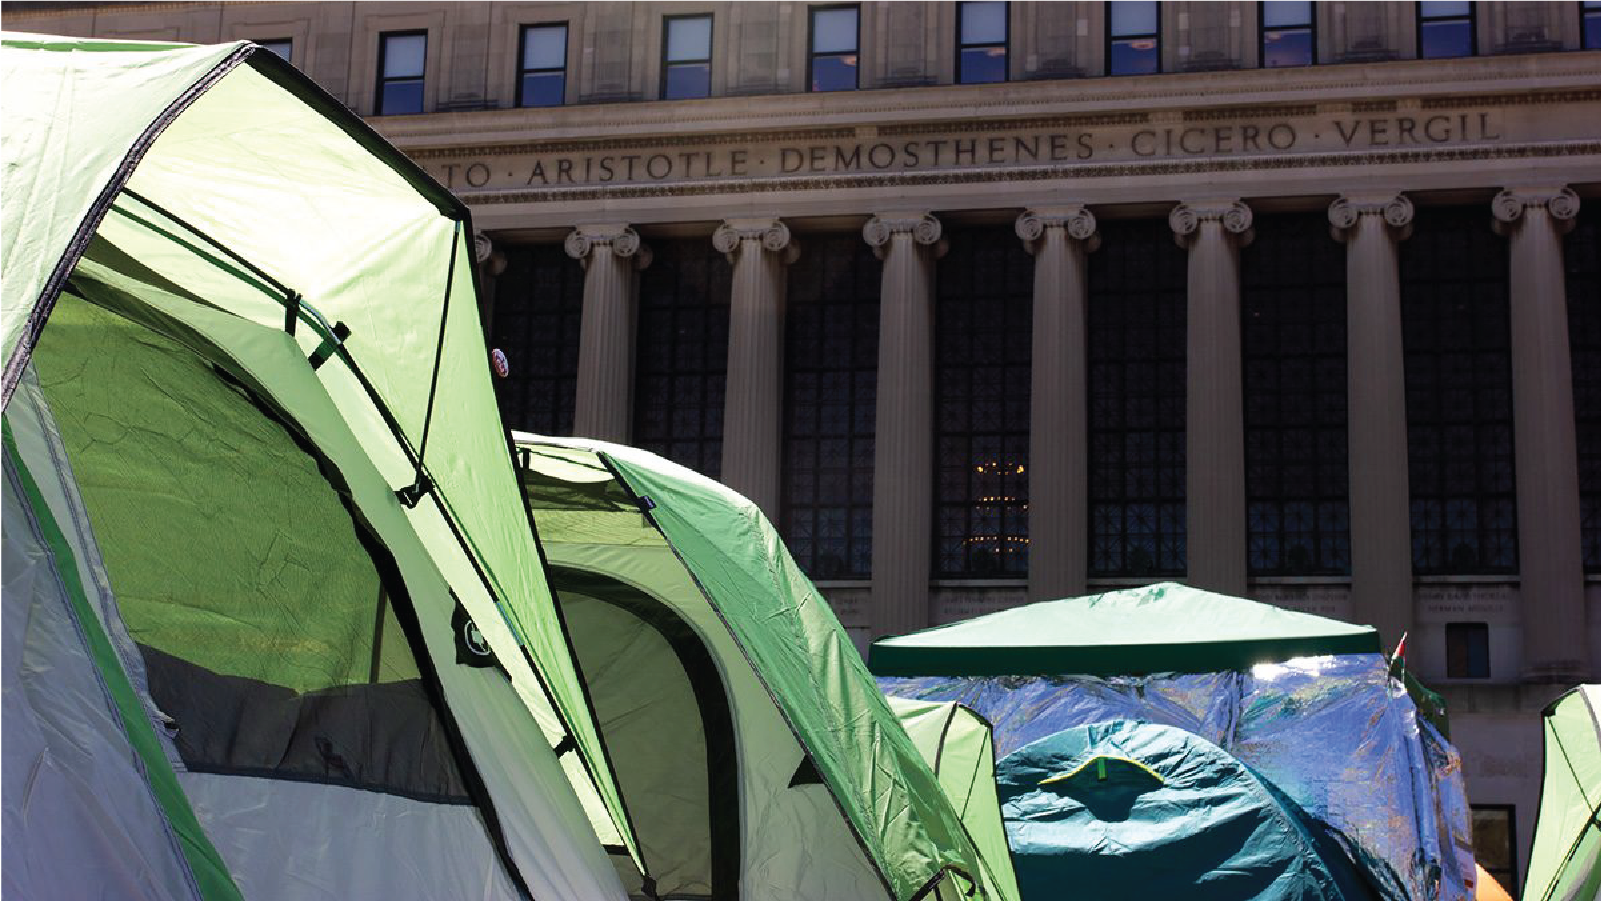 An encampment set up in front of Butler Library. Photo by Edward Lopez of City Newsroom.